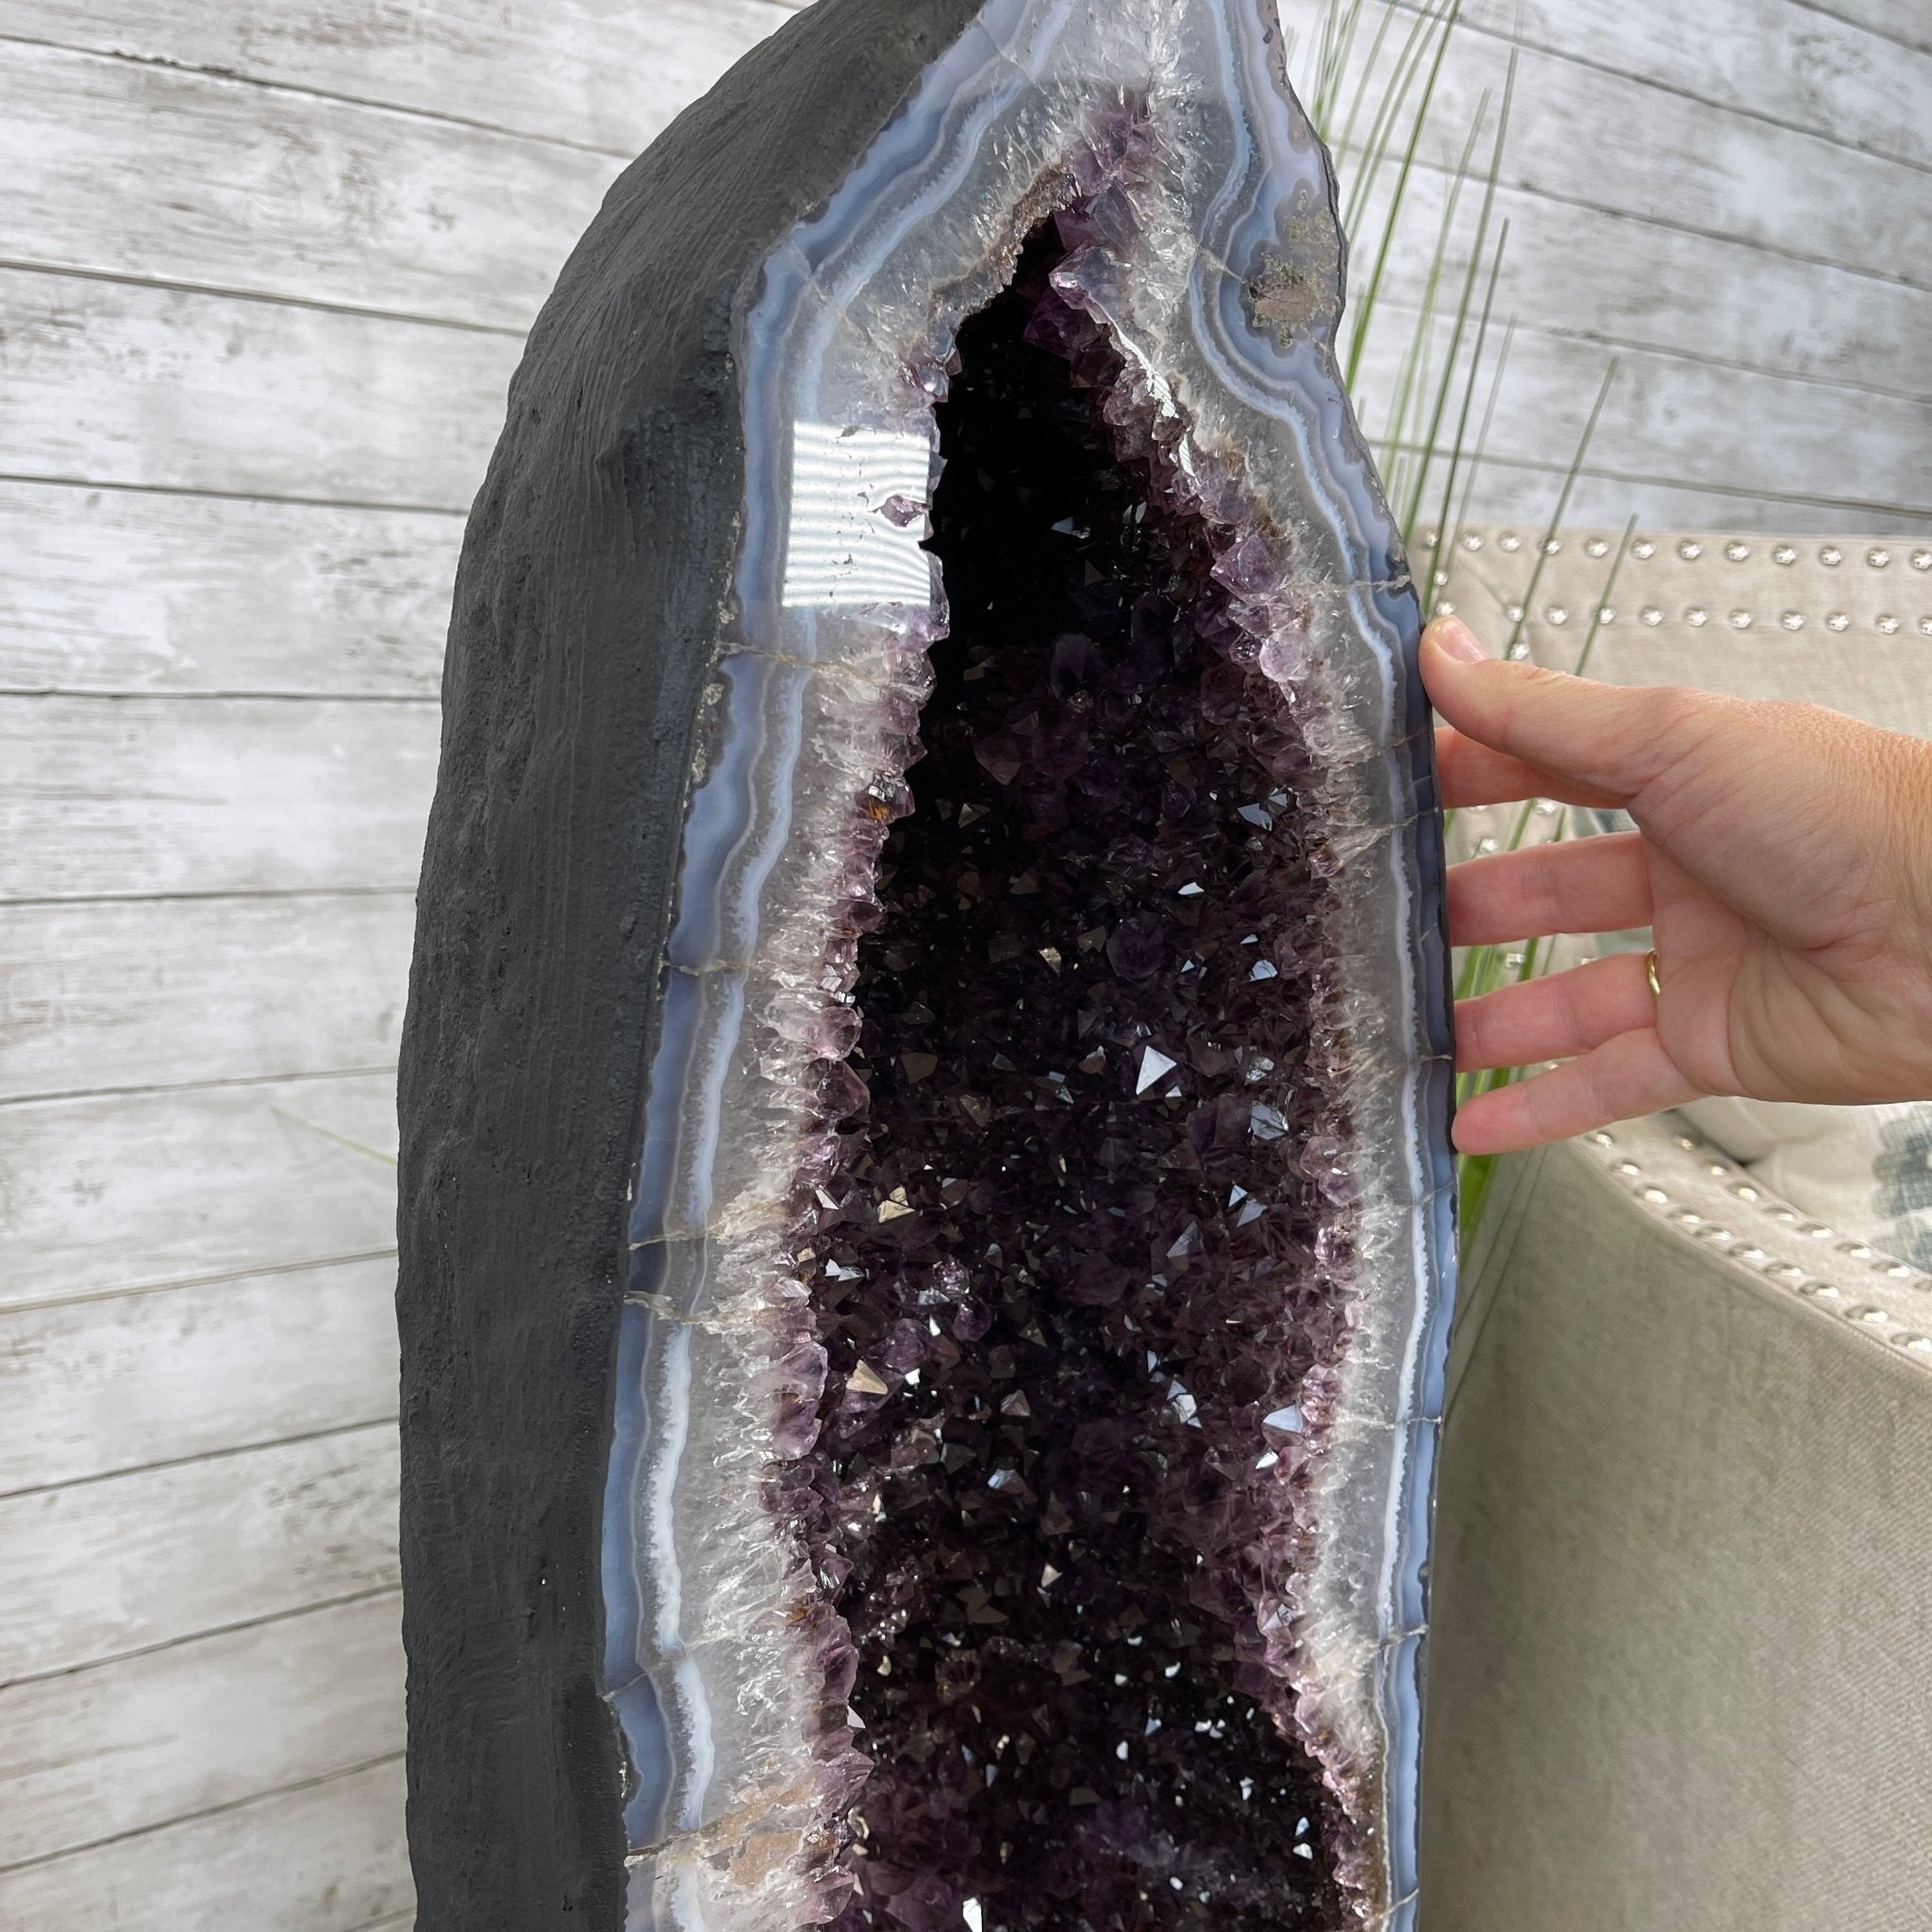 Extra Quality Brazilian Amethyst Cathedral, 39.25” tall & 191.8 lbs #5601-0398 by Brazil Gems - Brazil GemsBrazil GemsExtra Quality Brazilian Amethyst Cathedral, 39.25” tall & 191.8 lbs #5601-0398 by Brazil GemsCathedrals5601-0398